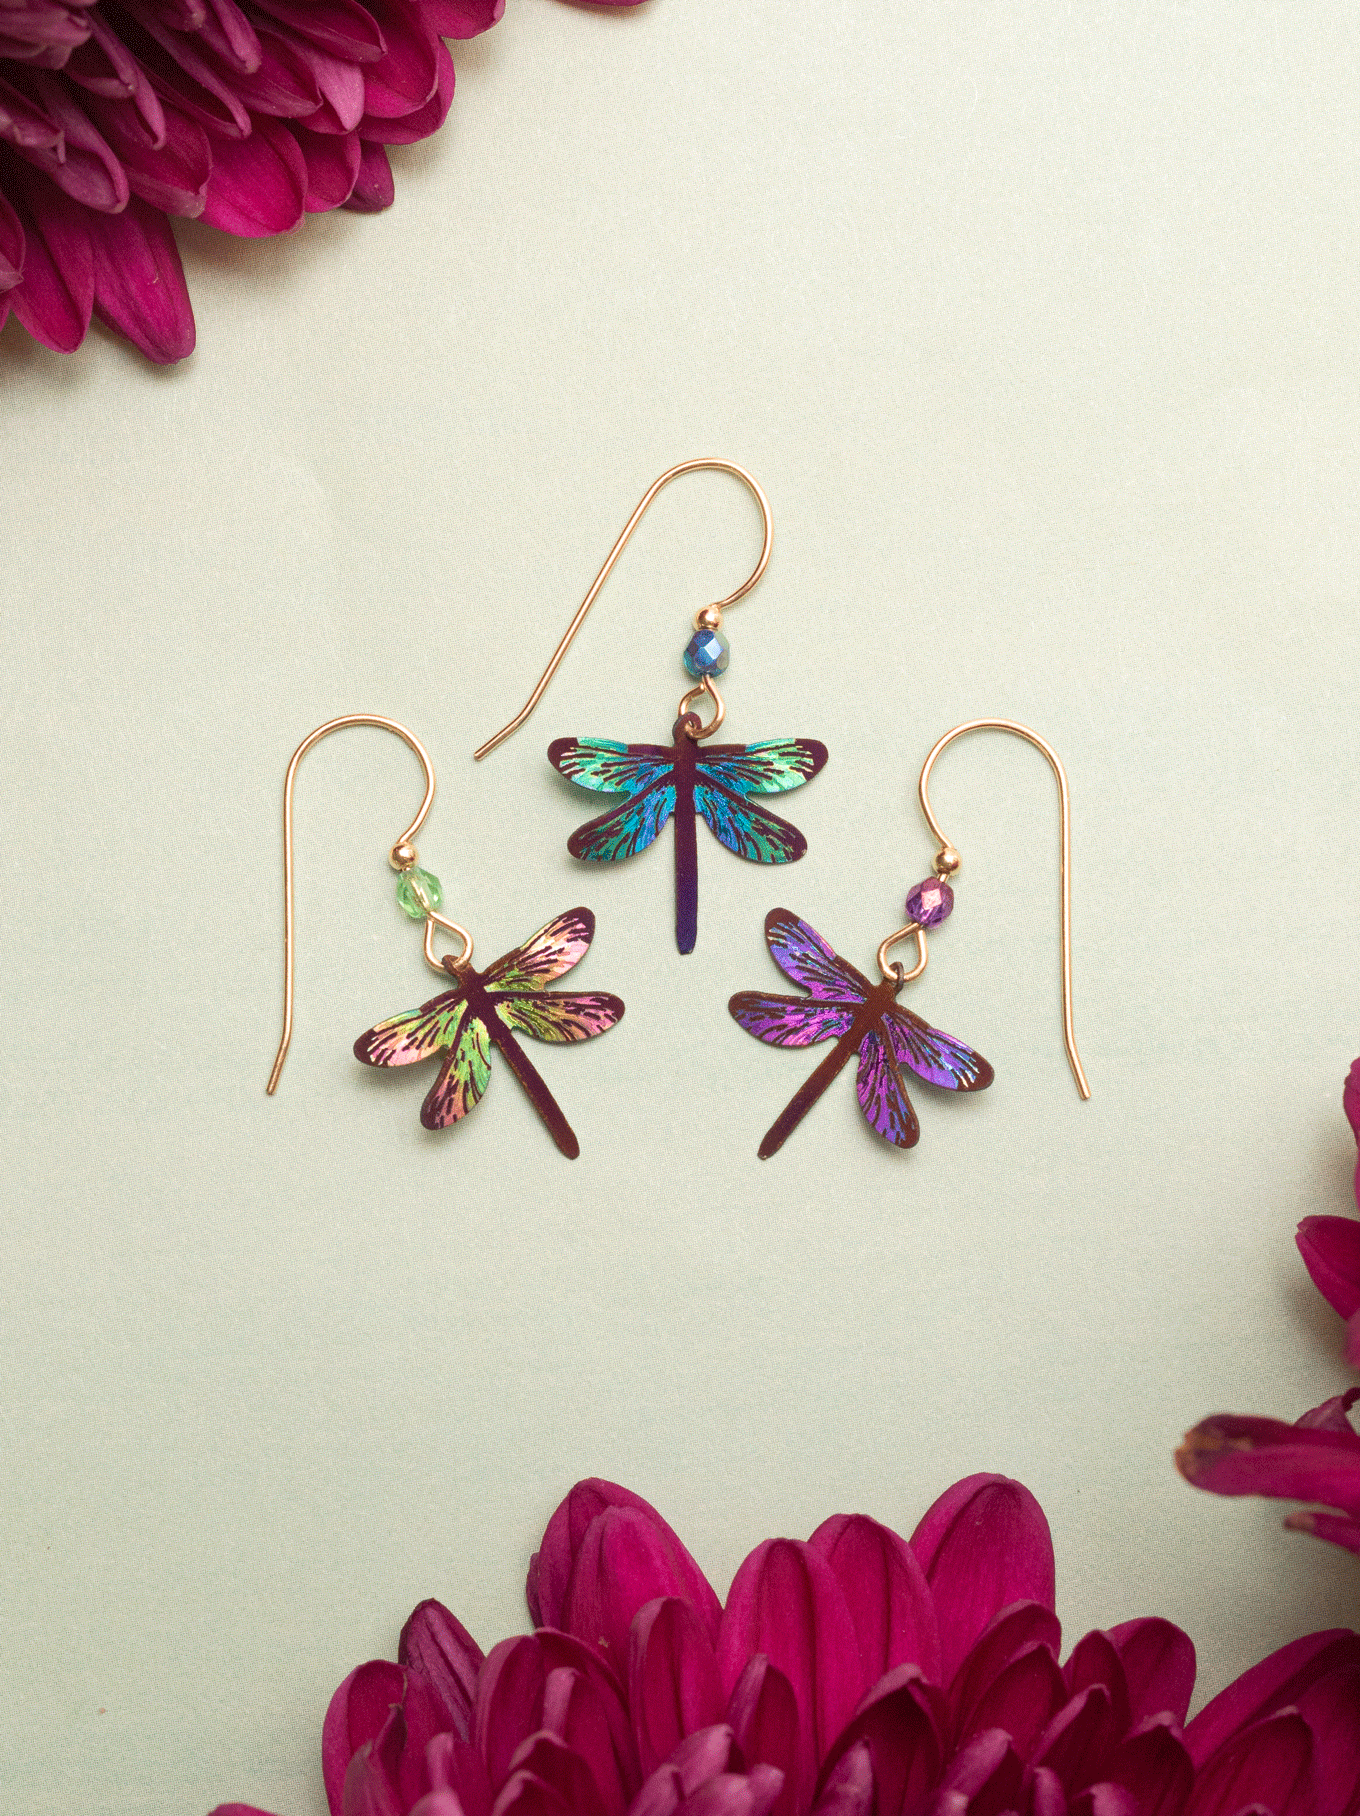 Dragonfly Dreams Earrings - Unique Artisan Crafted Jewelry – Holly Yashi